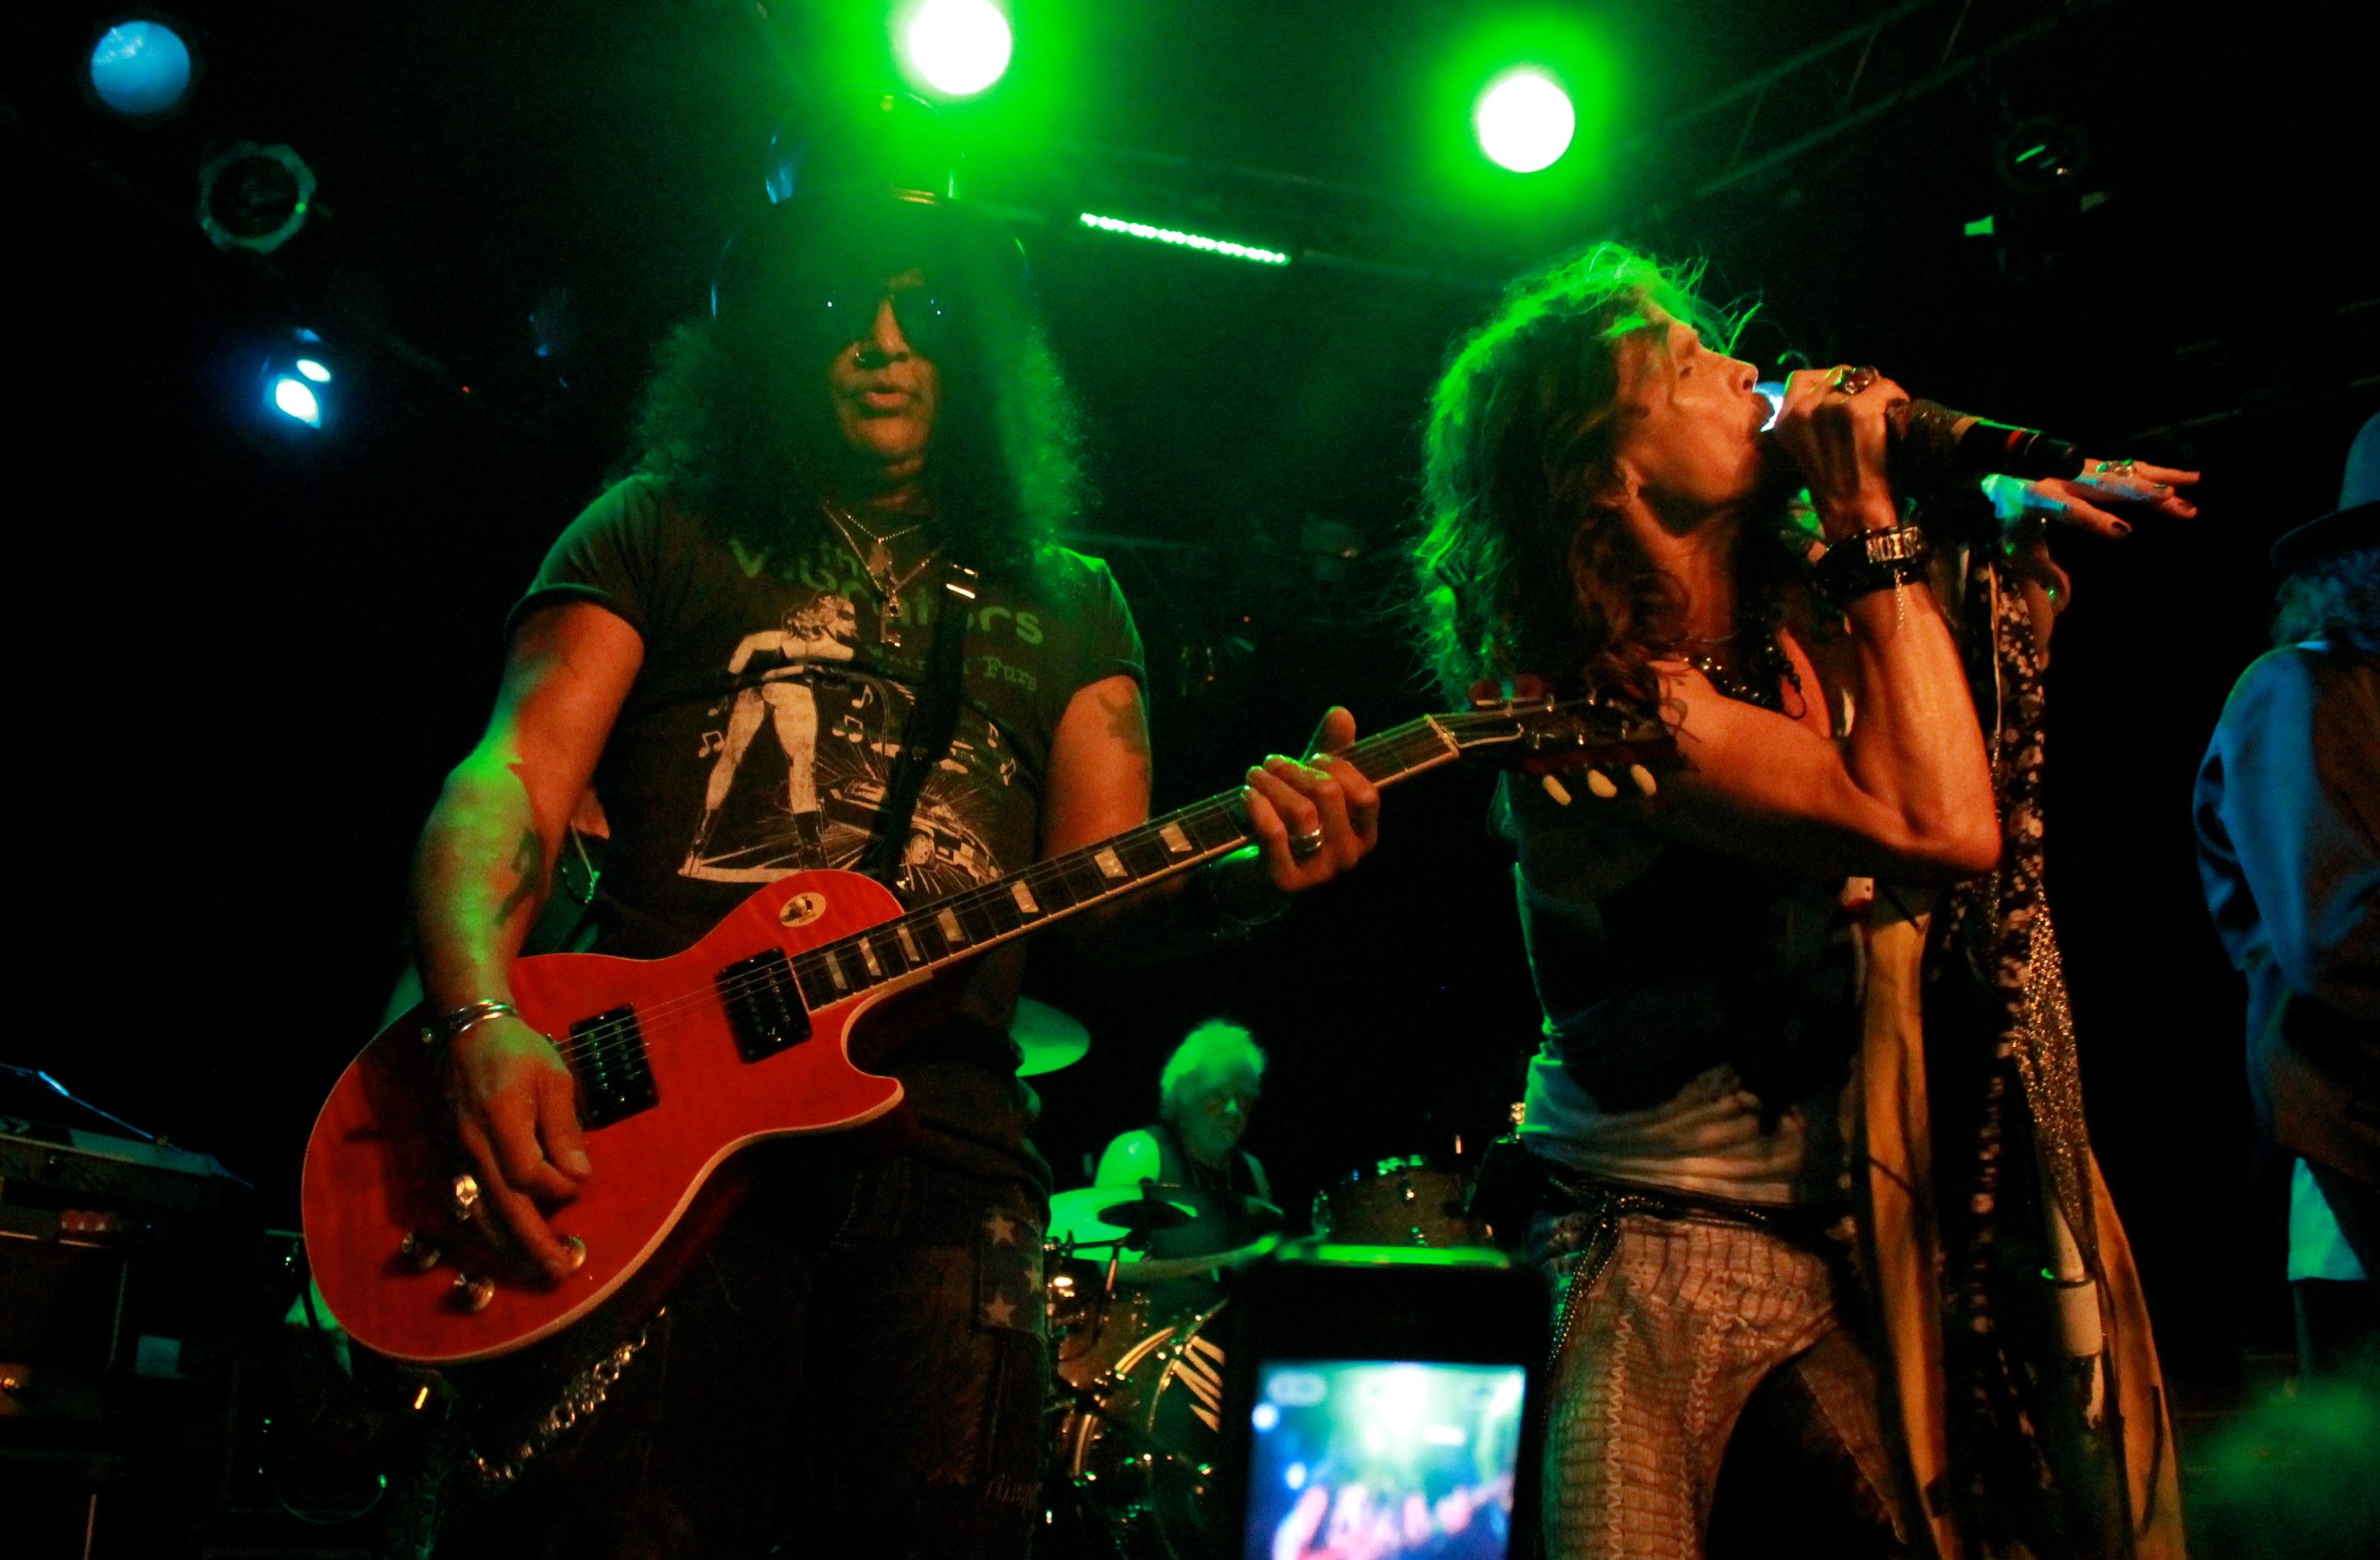 Aerosmith Announces Release Of Rare Archival Concert Films In Honor Of 50th Anniversary